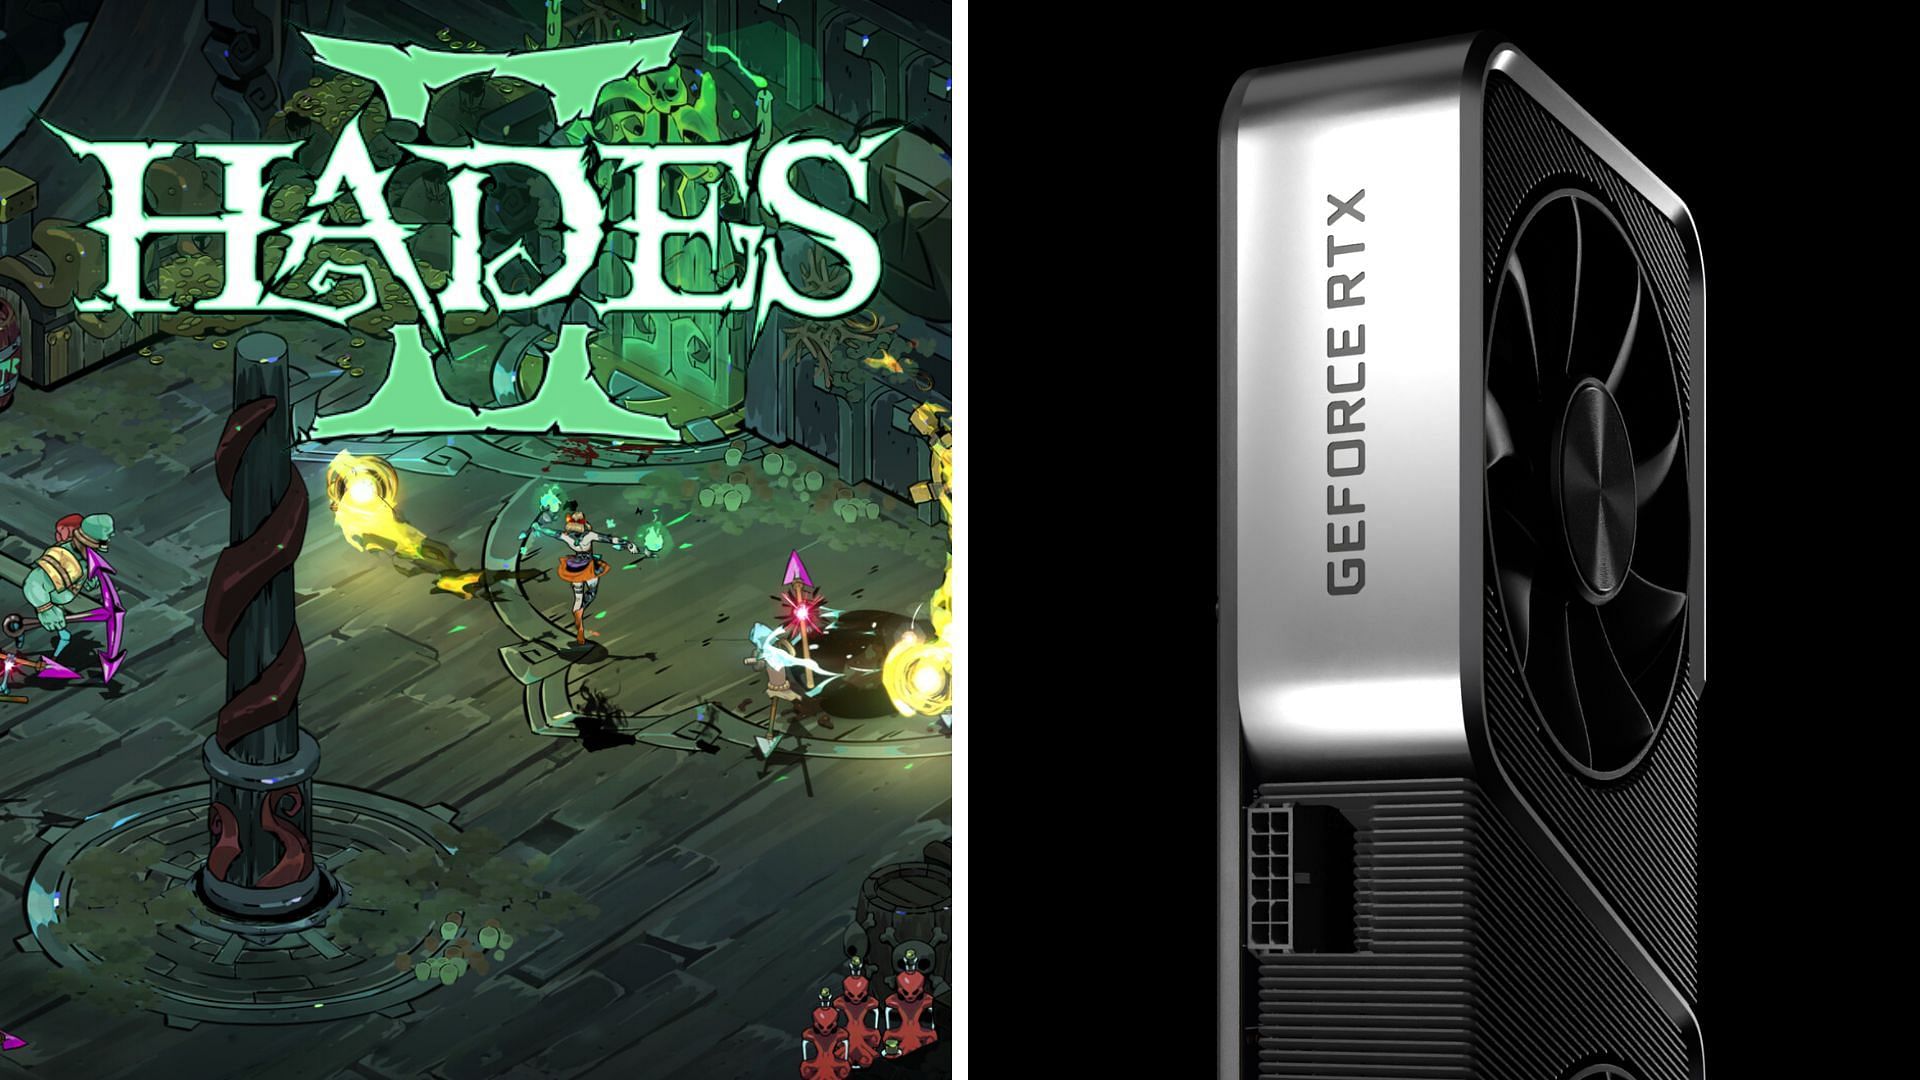 The Nvidia RTX 3070 and 3070 Ti can play Hades 2 like a champ (Image via Nvidia and Supergiant Games)